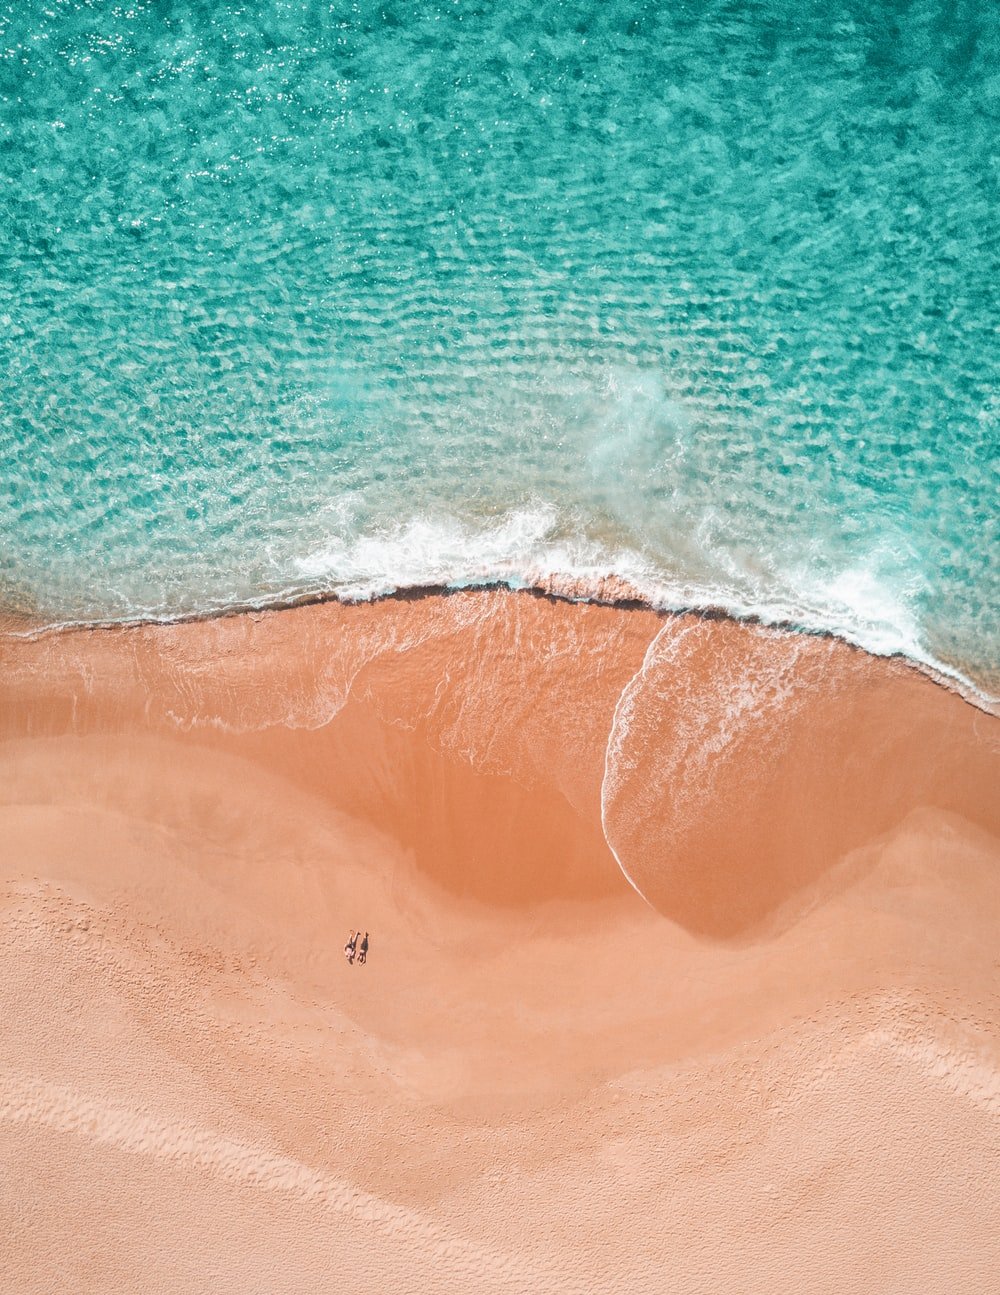 Beach From Above Picture. Download Free Image